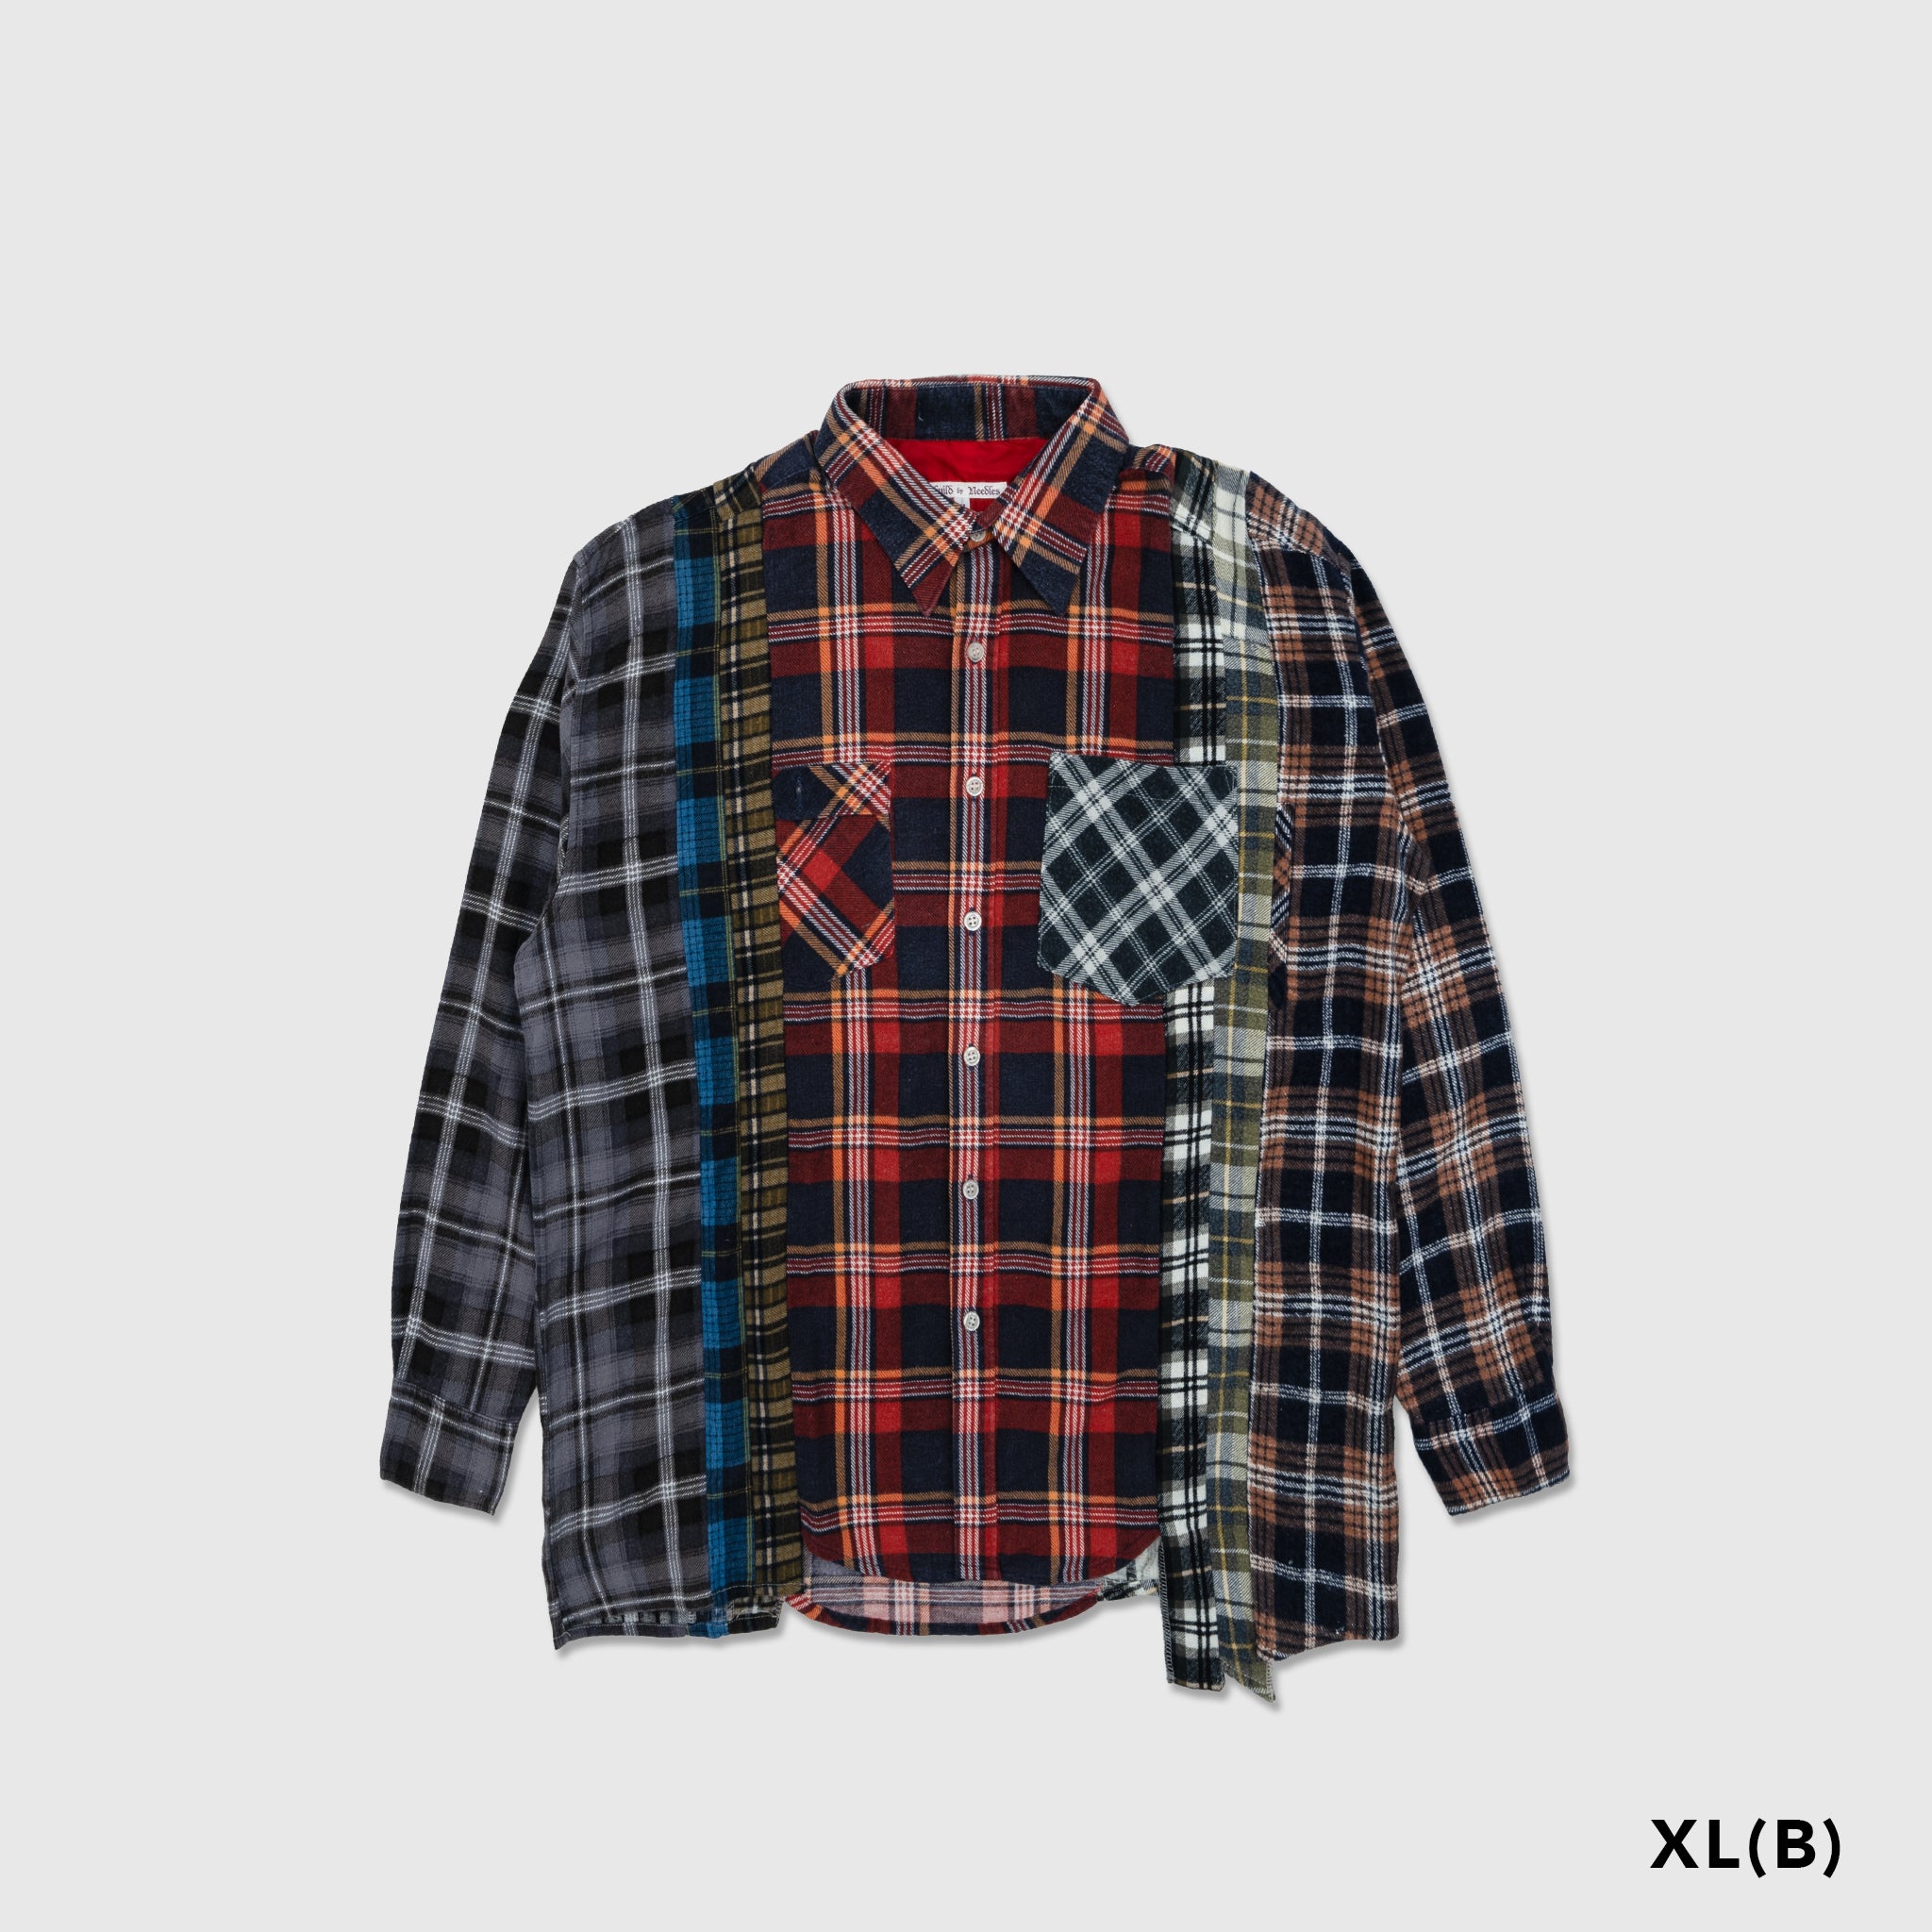 REBUILD BY NEEDLES 7 CUTS FLANNEL SHIRT